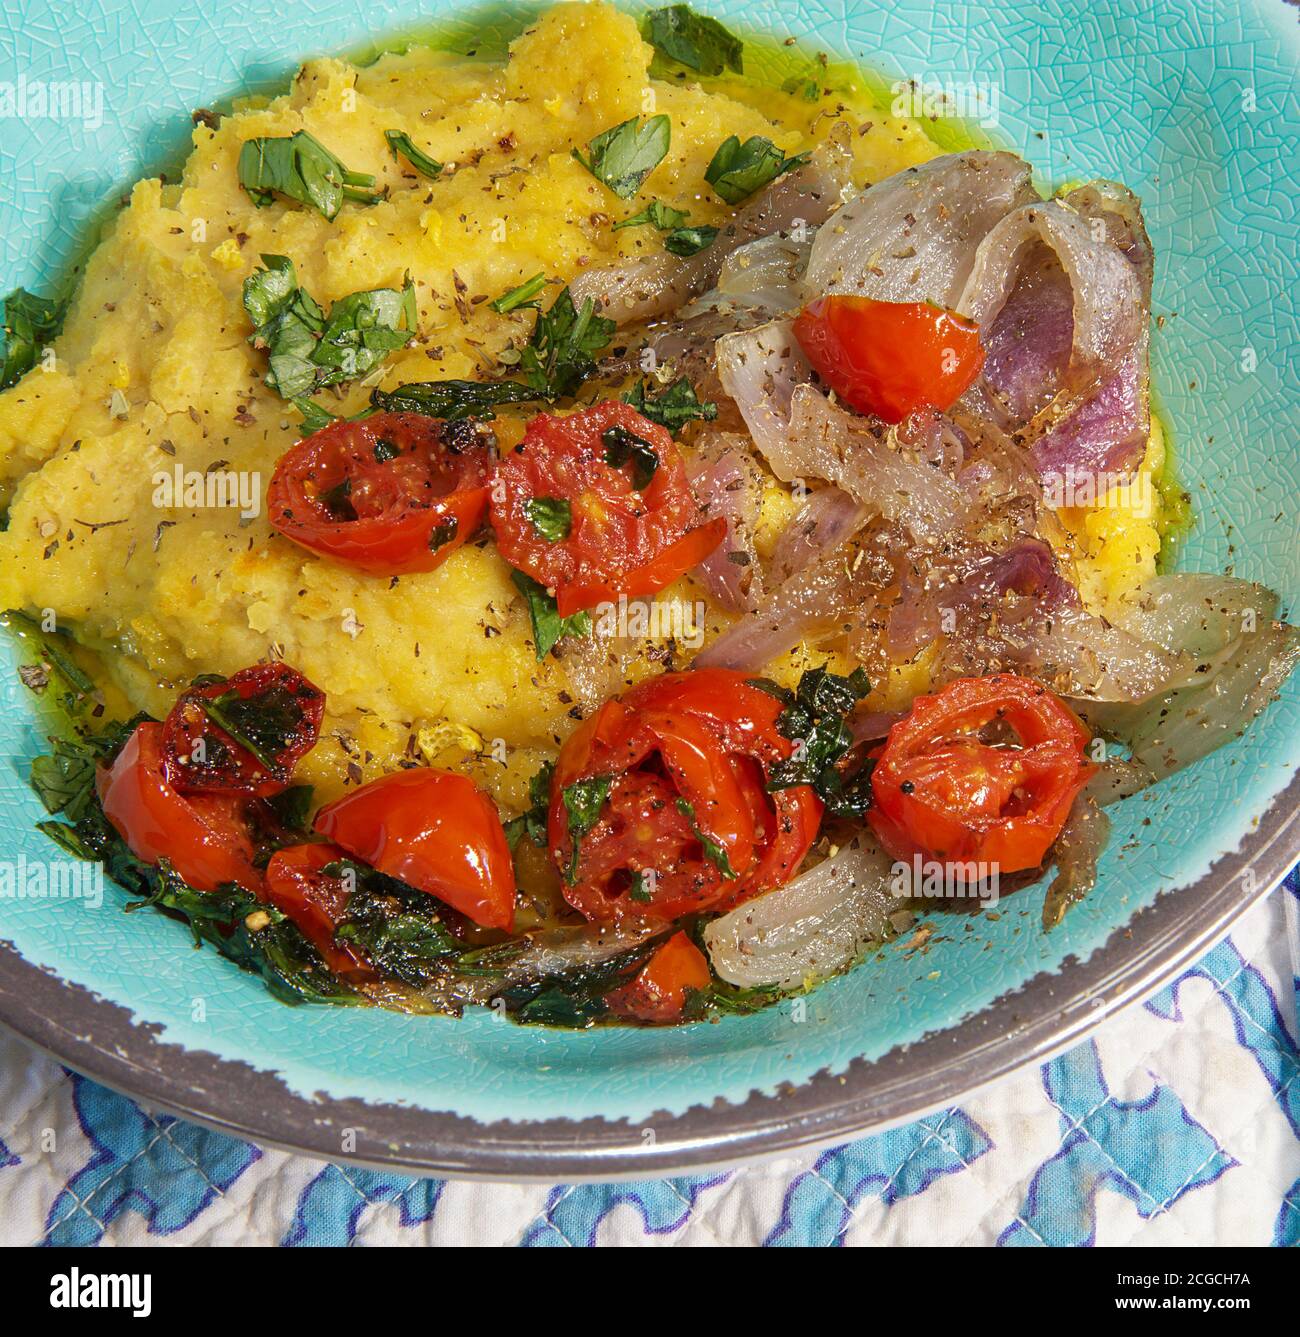 Greek Fava.Yellow split pea puree with cherry tomatoes and caramelized onions ,garnished with parsley. Mediterranean traditional meal. Stock Image. Stock Photo